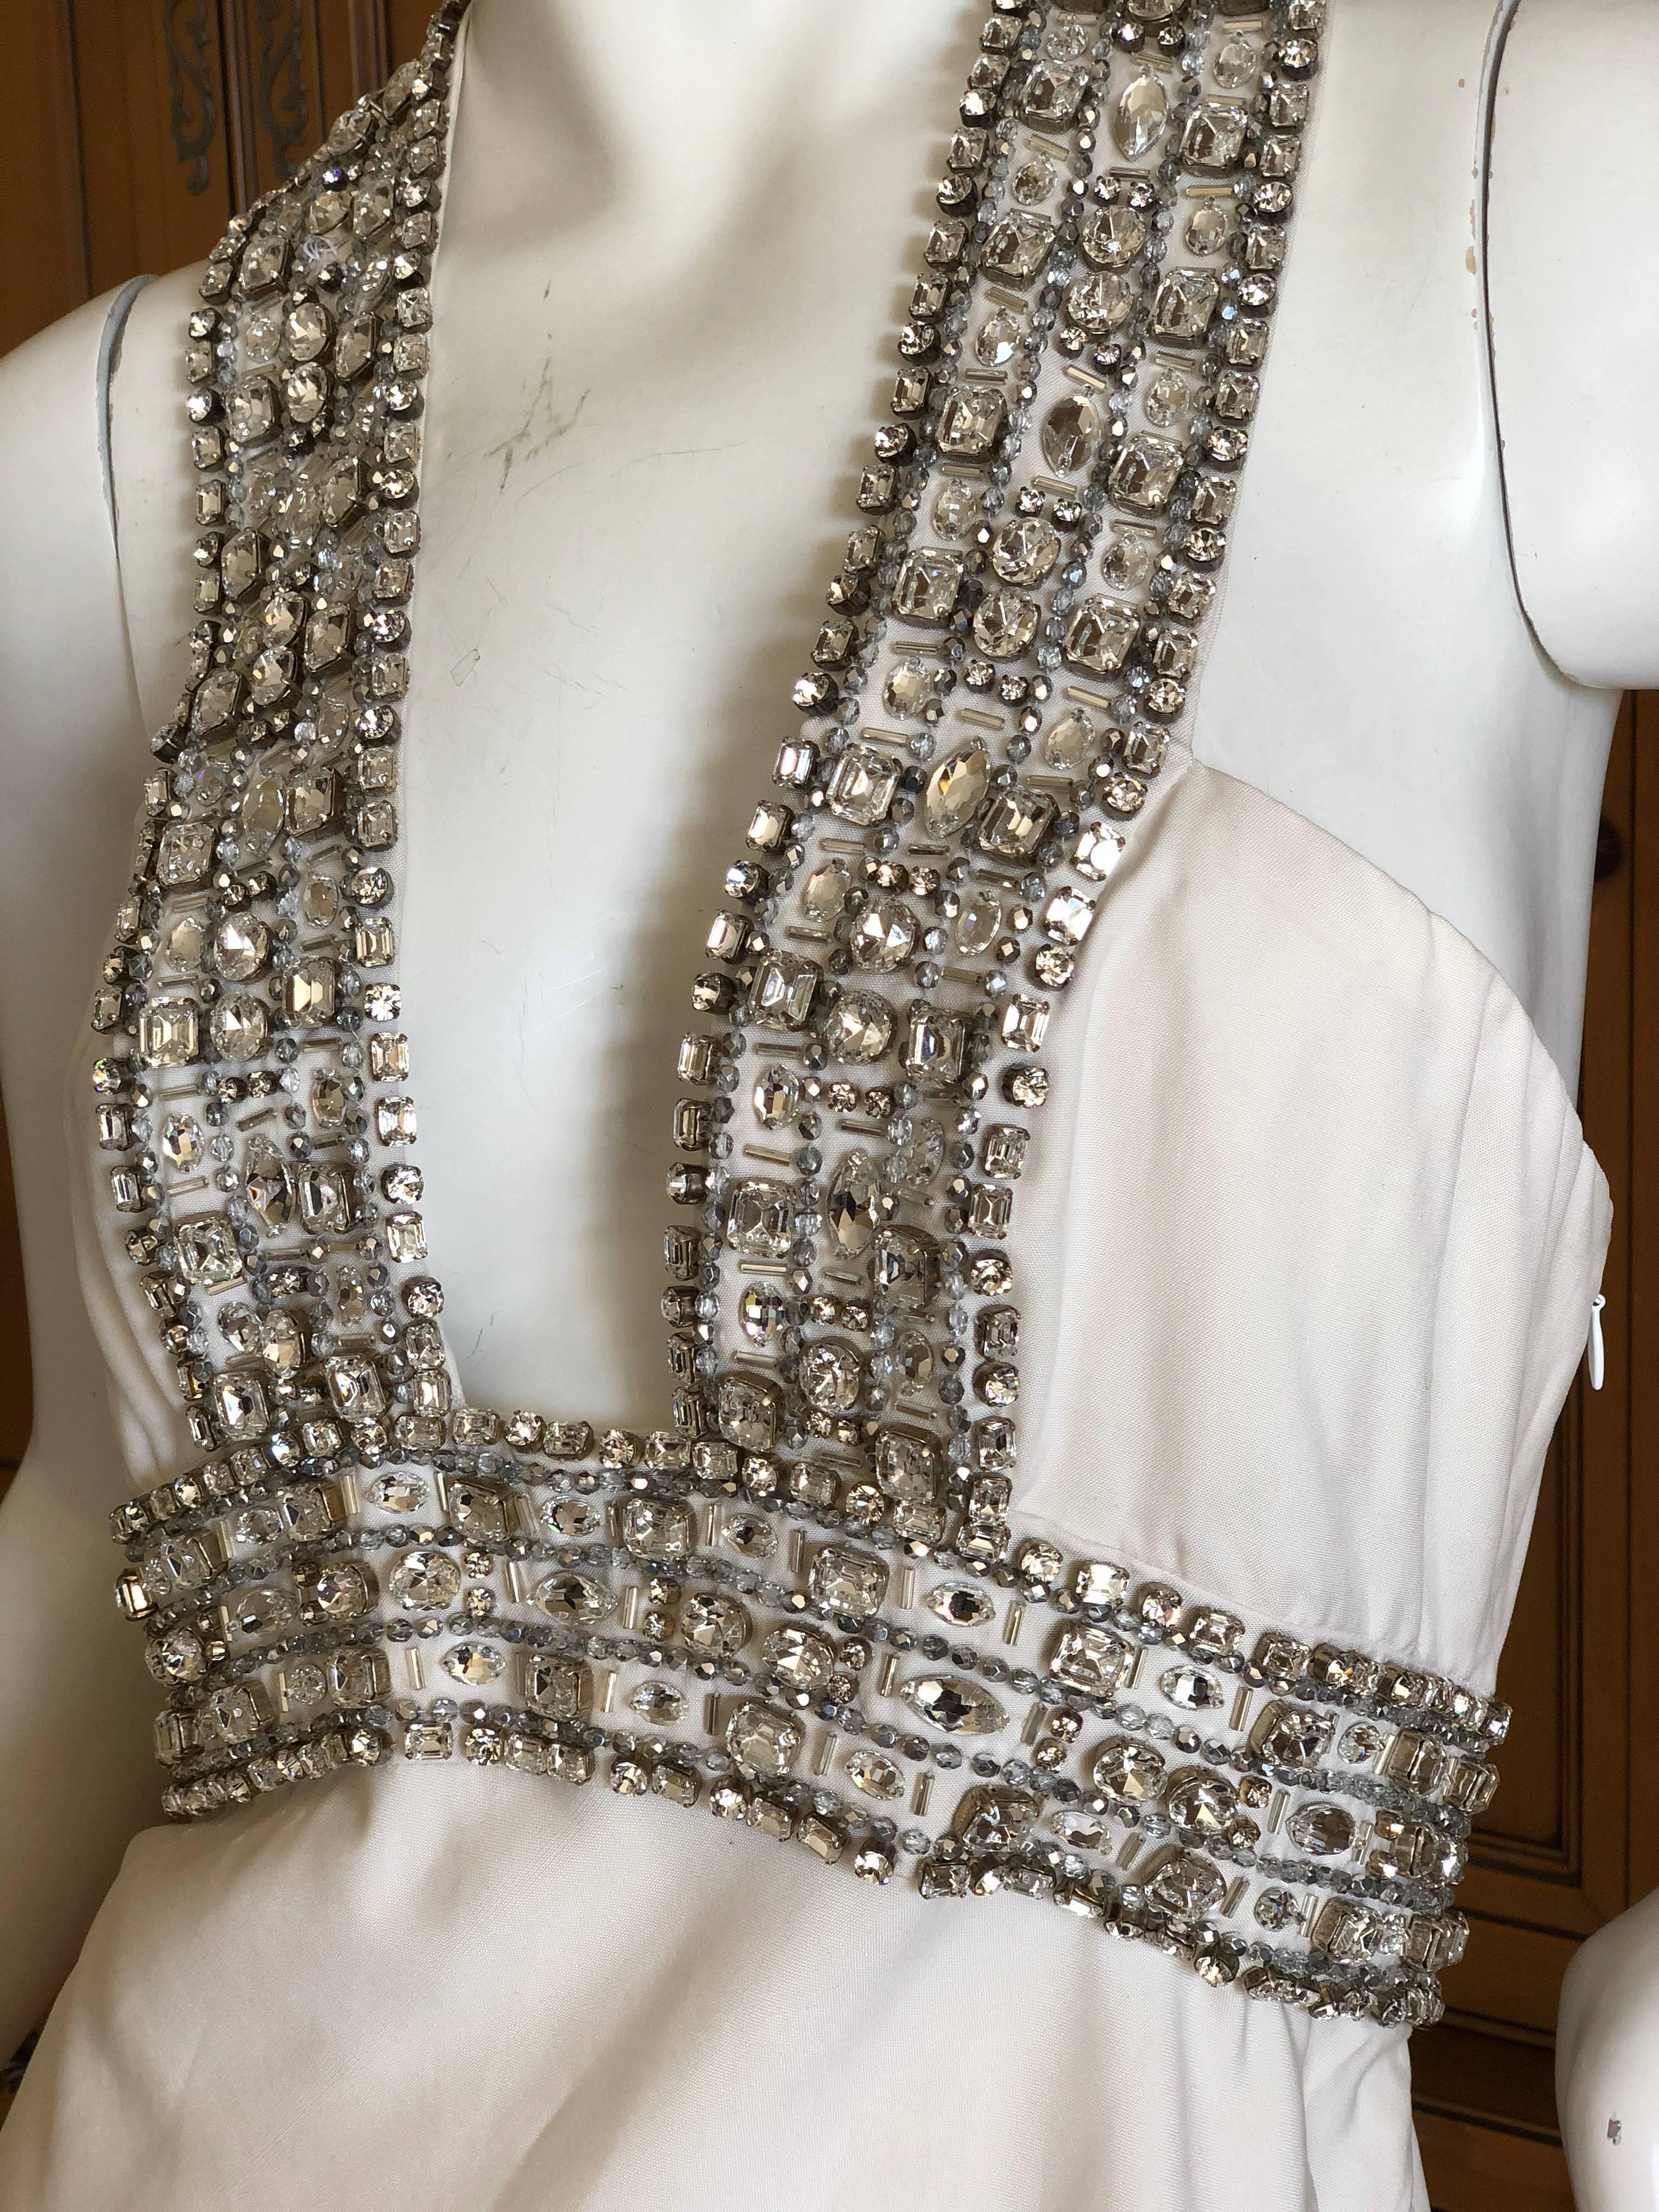 Exquisite Azzaro off white Goddess Dress with dramatic crystal jewel details around the very low cut neckline.
This is so amazing, much prettier than the photos show. 
Huge swags of crystals adorn this beautiful piece , a real showstopper.
This